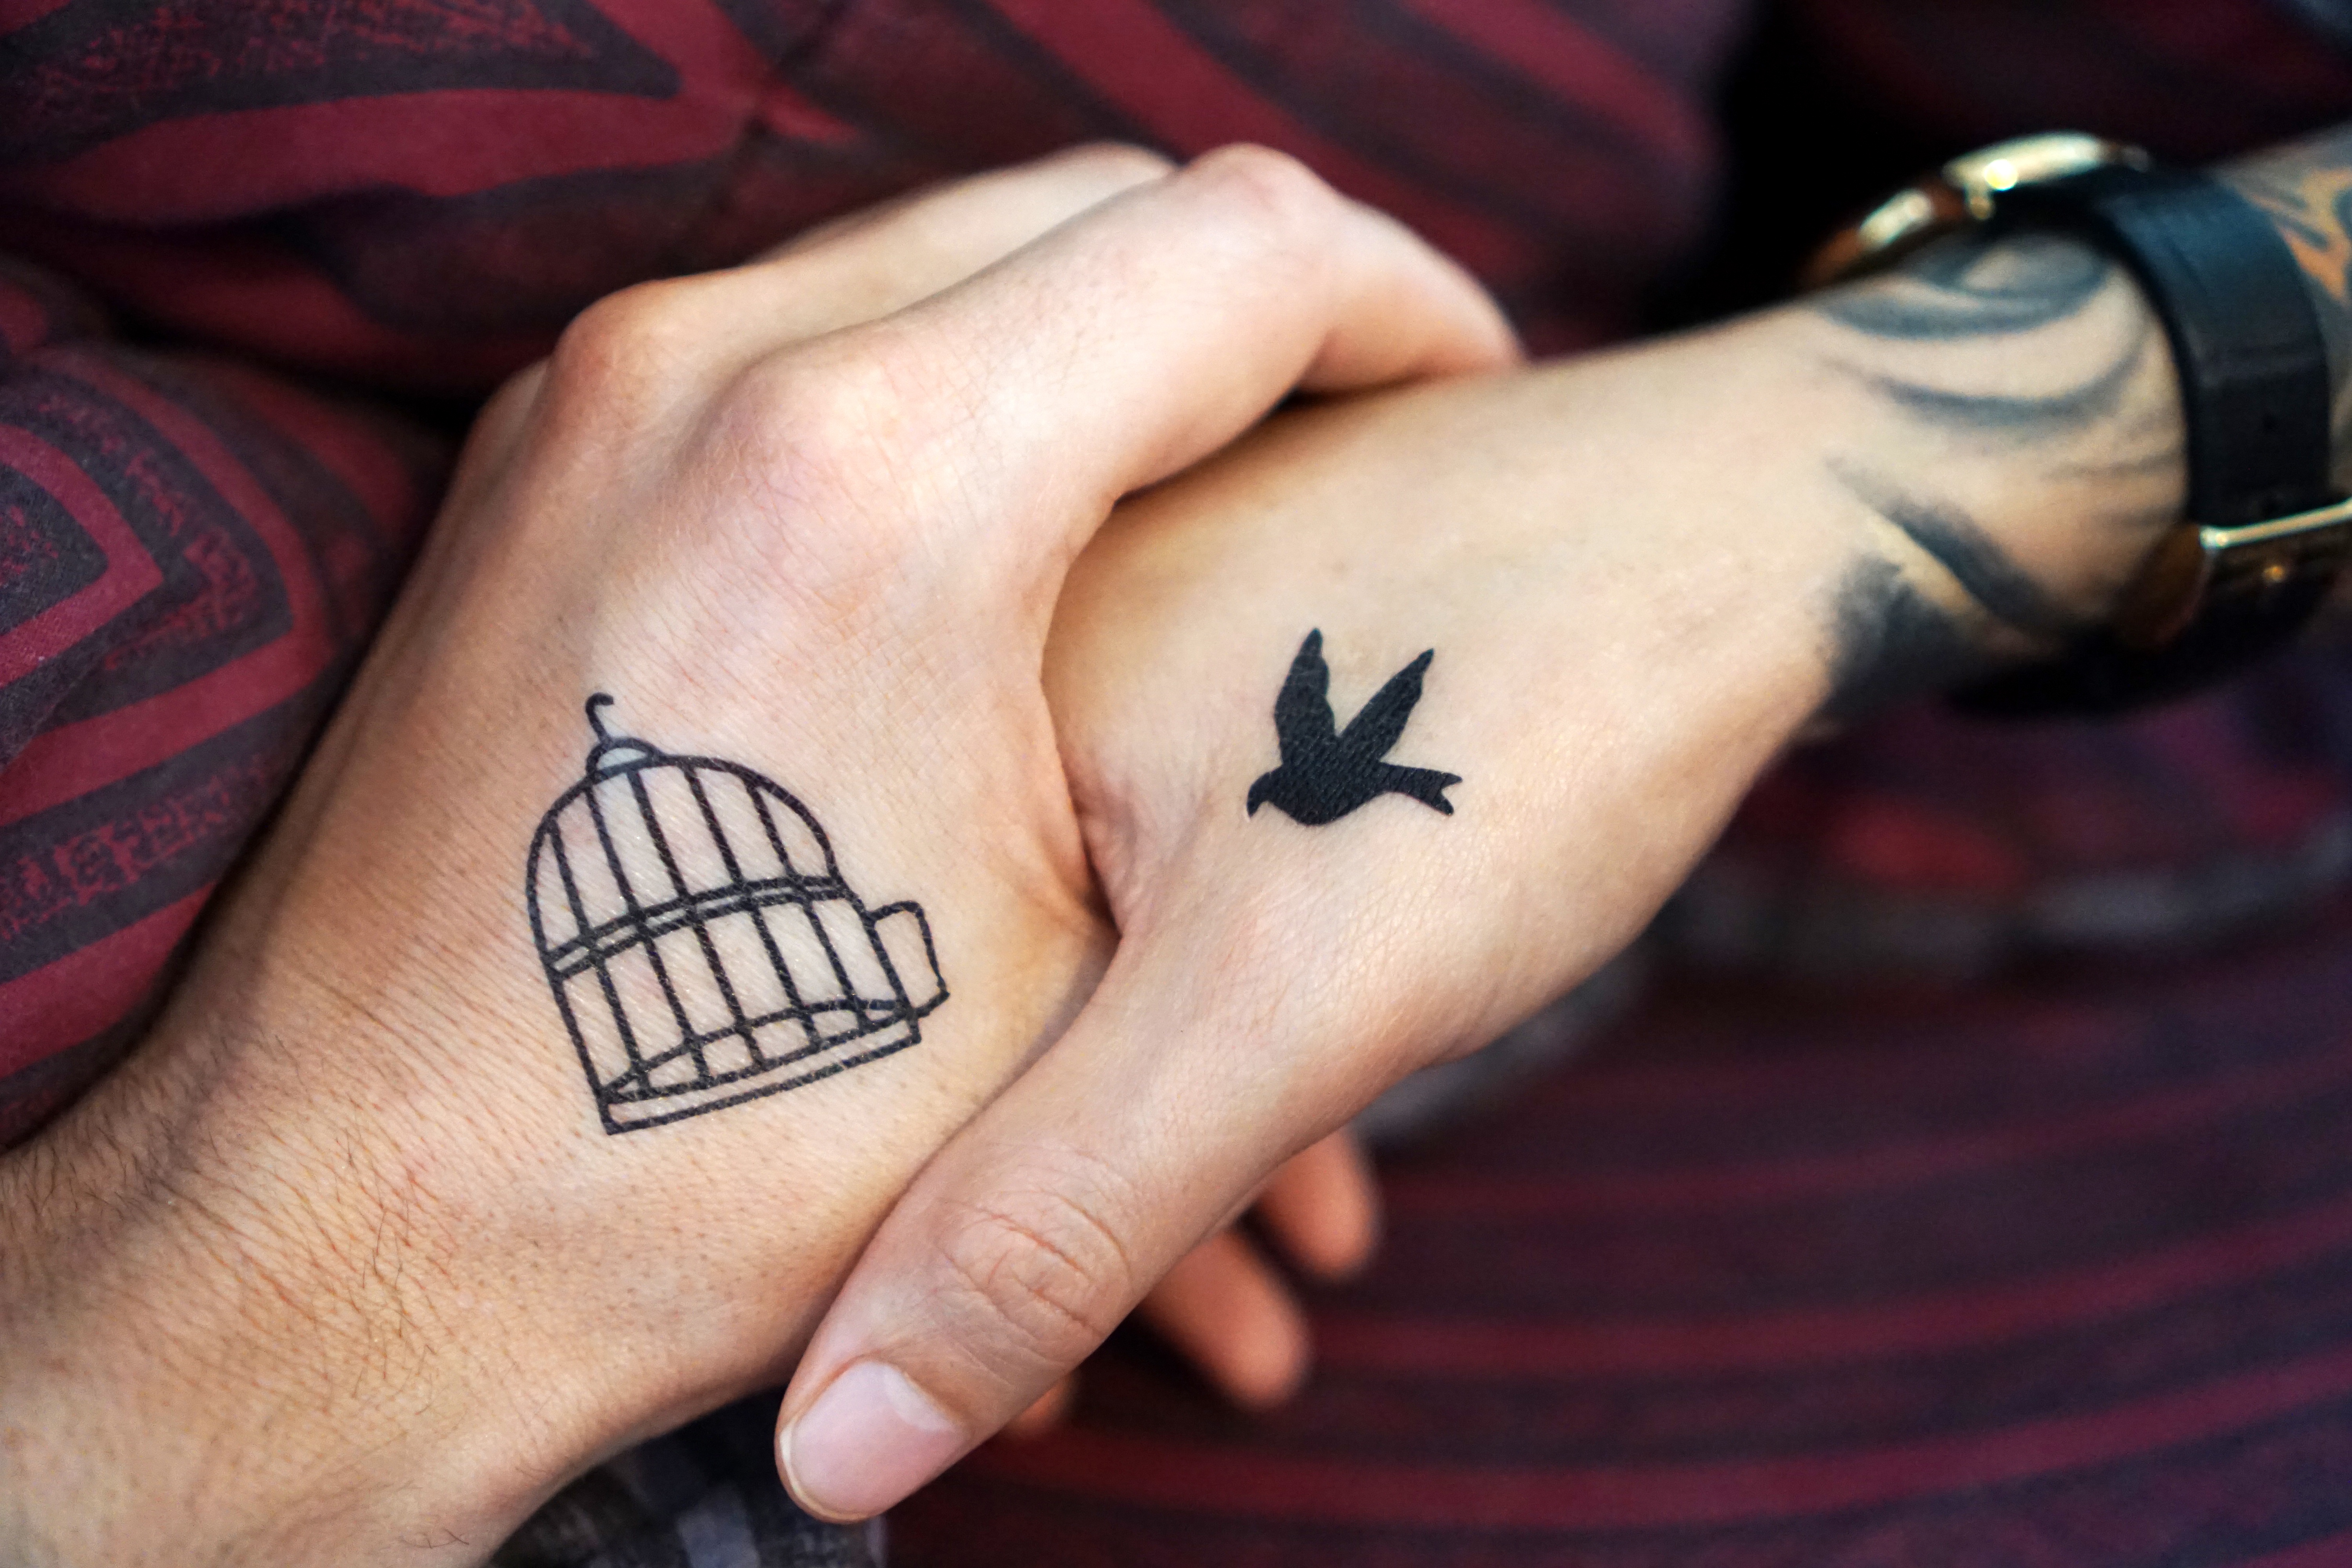 tattoo, love, tattoos, couple, pair, hands wallpaper for mobile